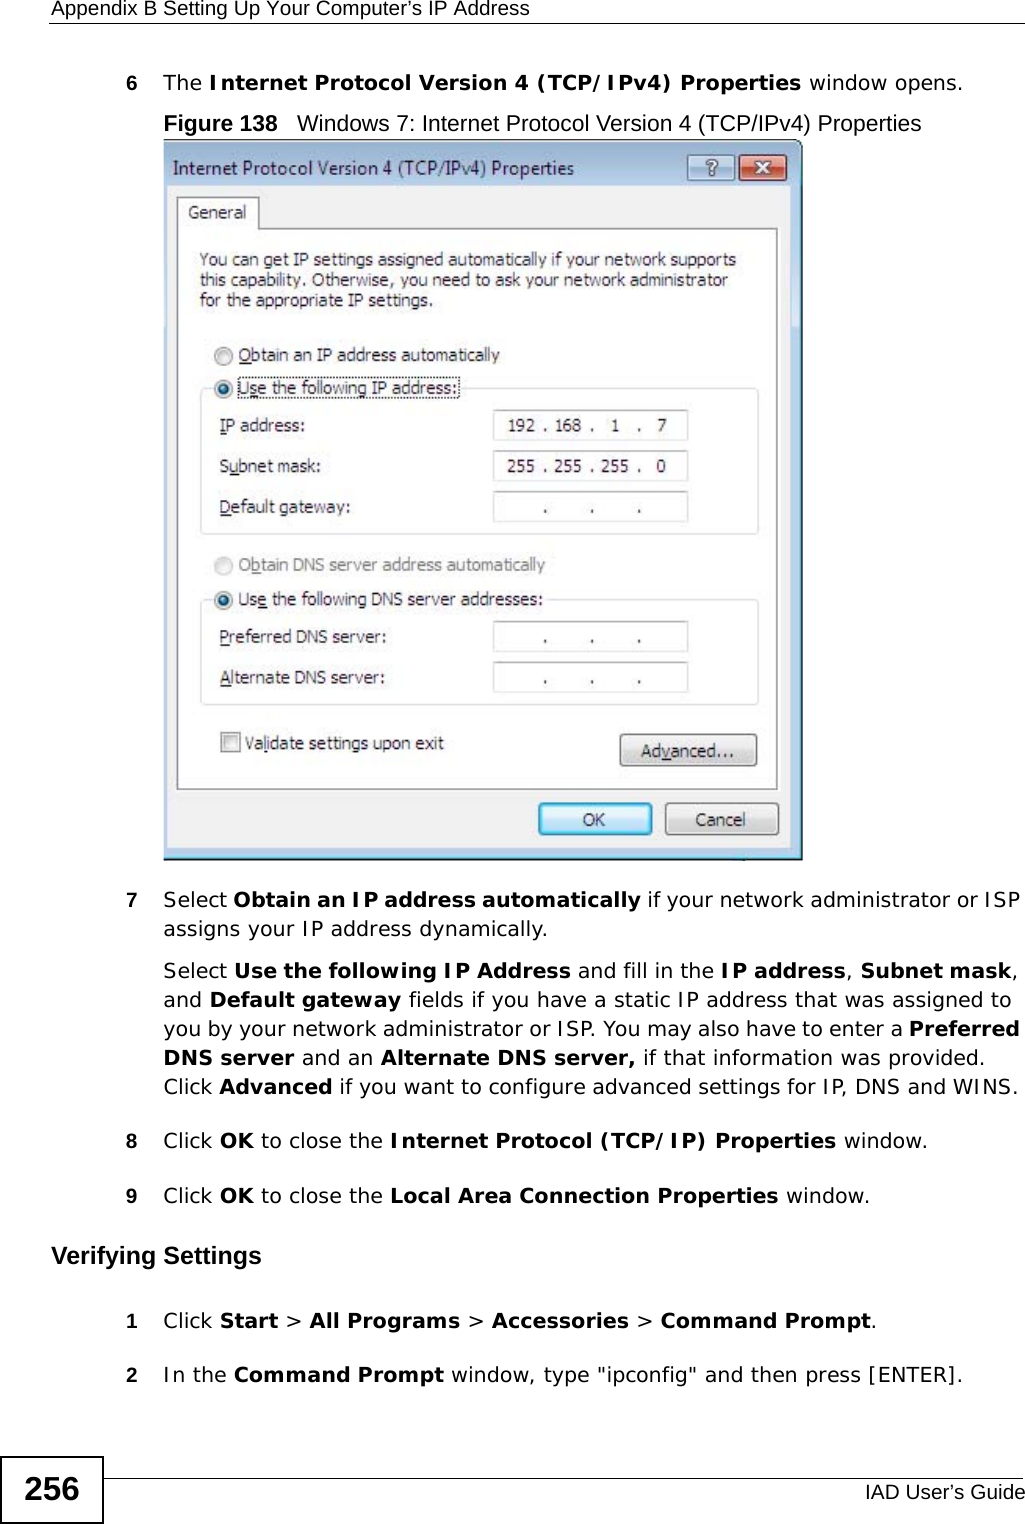 Appendix B Setting Up Your Computer’s IP AddressIAD User’s Guide2566The Internet Protocol Version 4 (TCP/IPv4) Properties window opens.Figure 138   Windows 7: Internet Protocol Version 4 (TCP/IPv4) Properties7Select Obtain an IP address automatically if your network administrator or ISP assigns your IP address dynamically.Select Use the following IP Address and fill in the IP address, Subnet mask, and Default gateway fields if you have a static IP address that was assigned to you by your network administrator or ISP. You may also have to enter a Preferred DNS server and an Alternate DNS server, if that information was provided. Click Advanced if you want to configure advanced settings for IP, DNS and WINS. 8Click OK to close the Internet Protocol (TCP/IP) Properties window.9Click OK to close the Local Area Connection Properties window.Verifying Settings1Click Start &gt; All Programs &gt; Accessories &gt; Command Prompt.2In the Command Prompt window, type &quot;ipconfig&quot; and then press [ENTER]. 